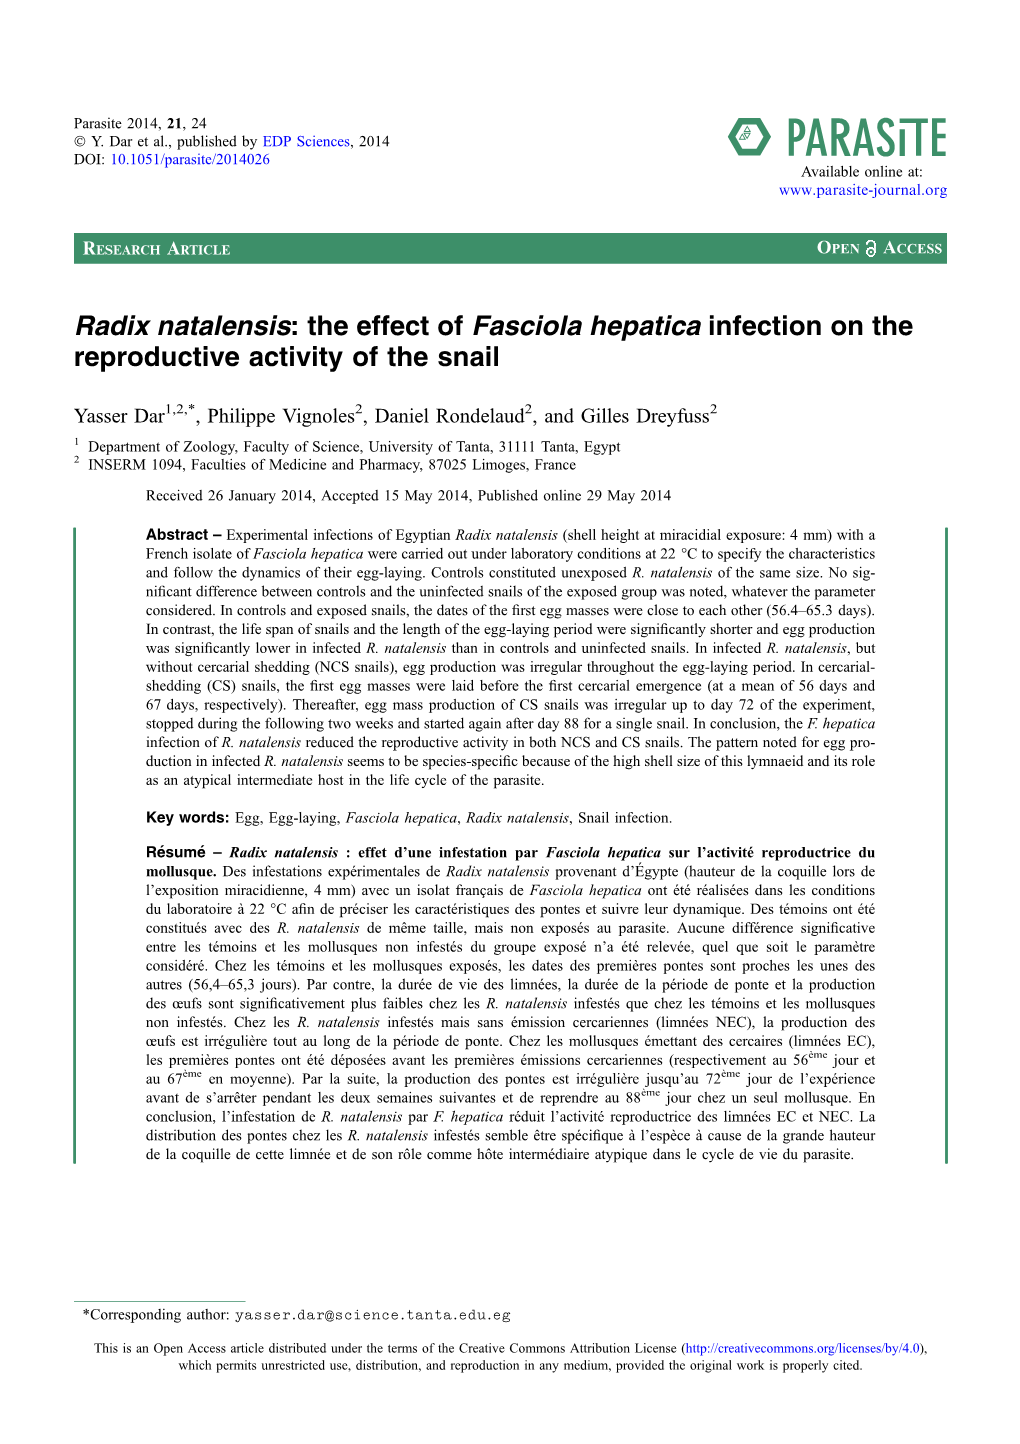 Radix Natalensis: the Effect of Fasciola Hepatica Infection on the Reproductive Activity of the Snail